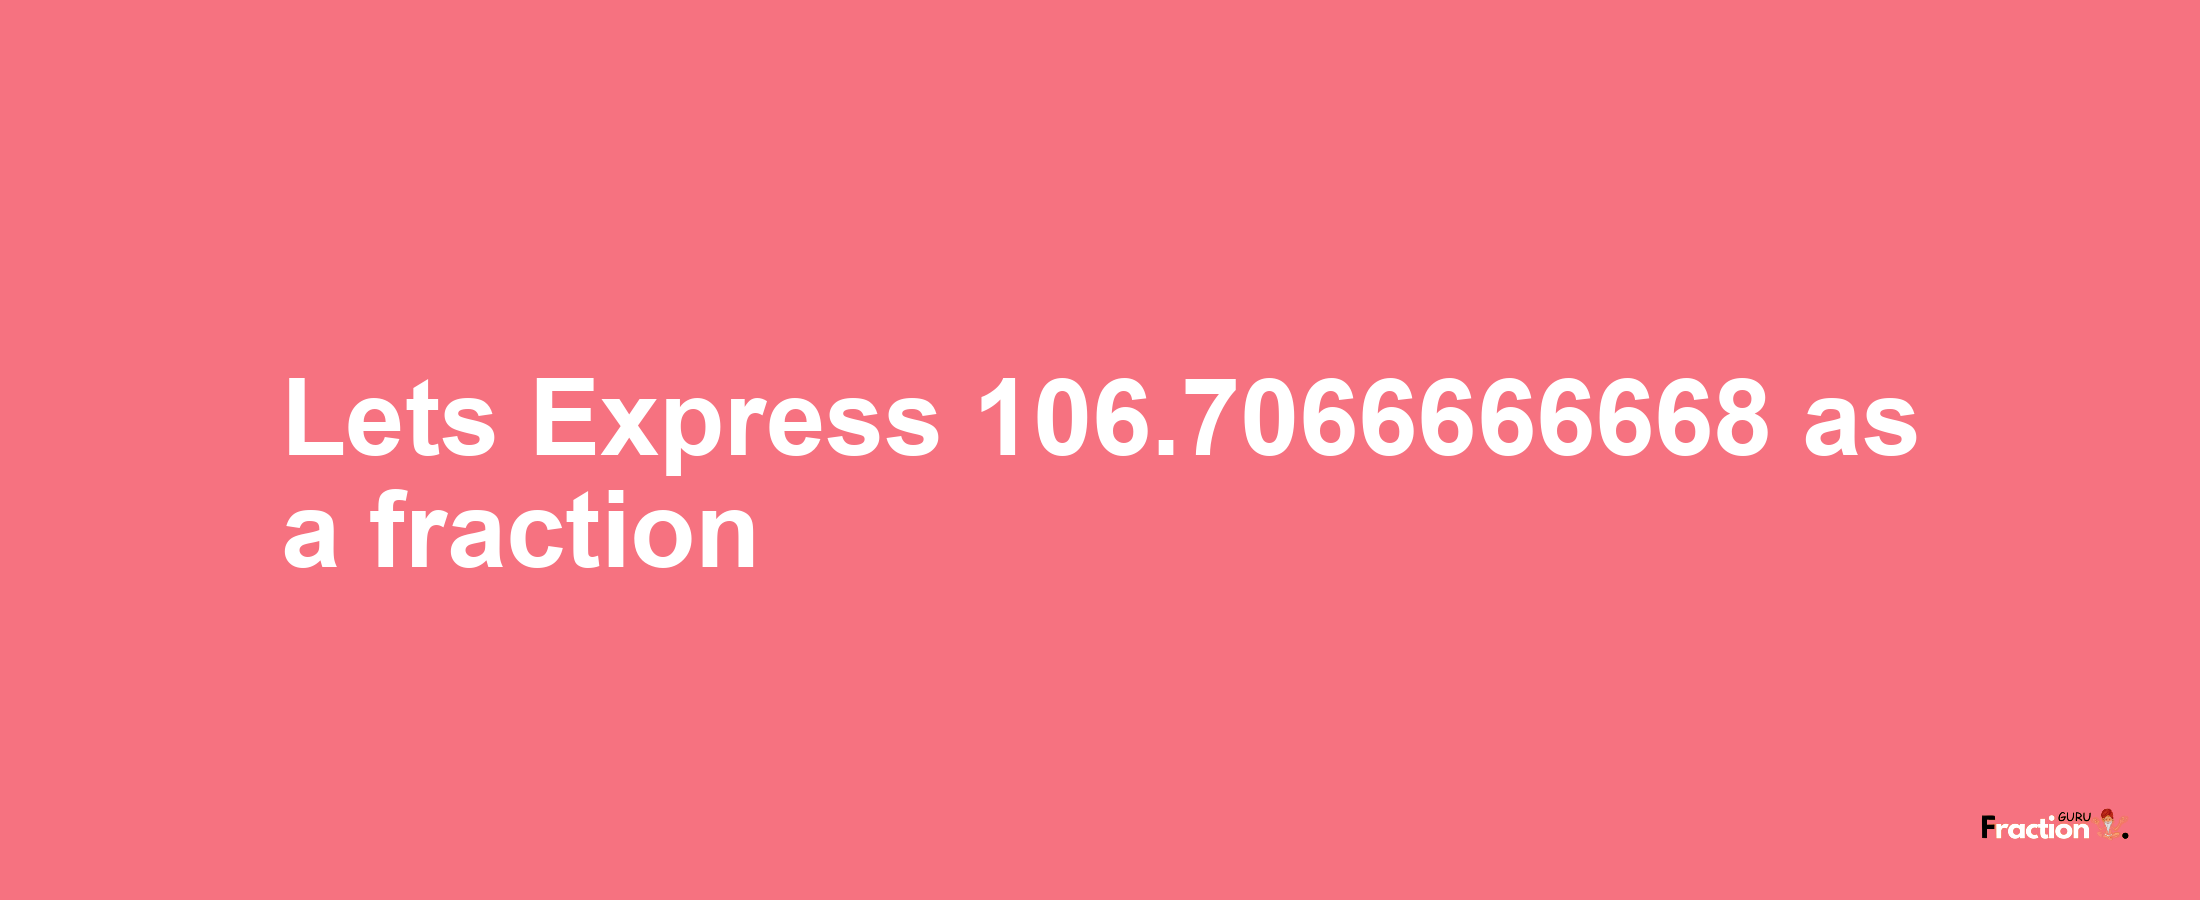 Lets Express 106.7066666668 as afraction